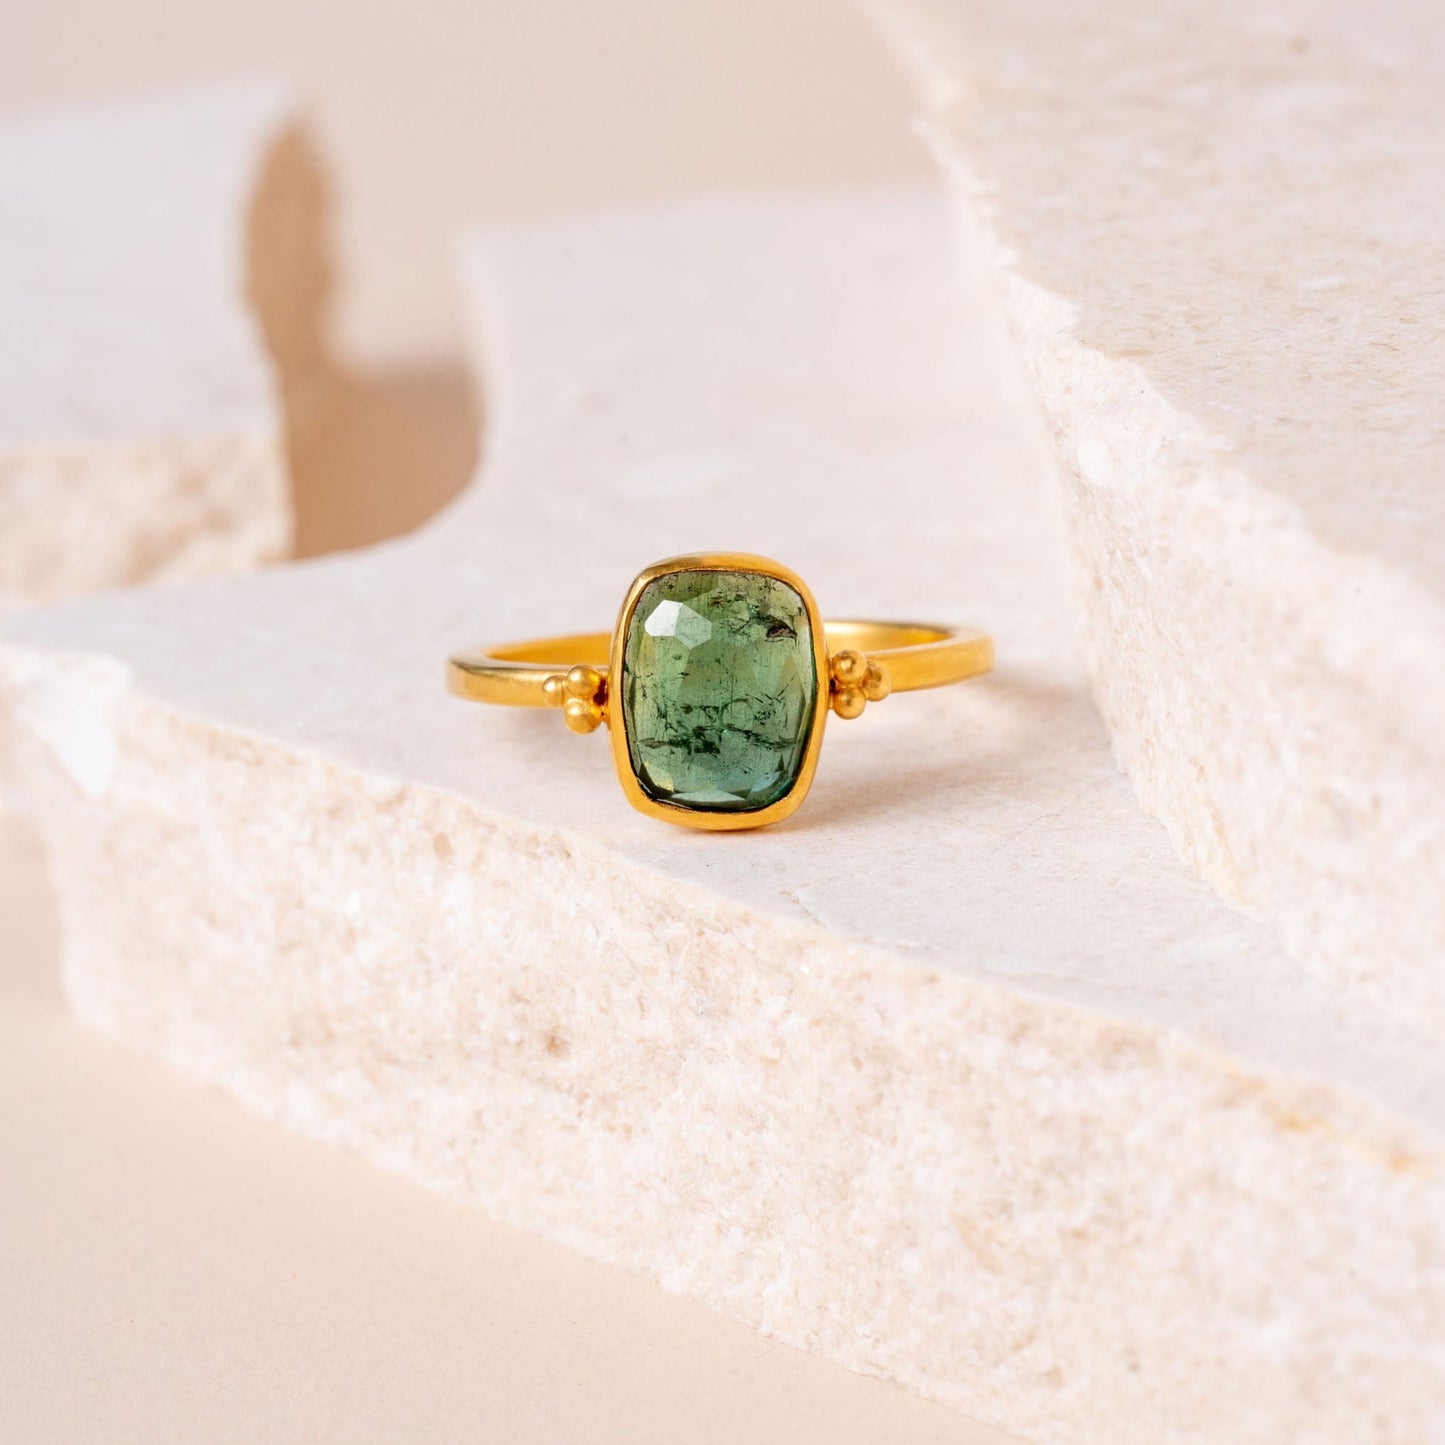 Close-up view of an exquisite gold ring, handcrafted with precision granulation and crowned by a captivating green tourmaline gemstone.